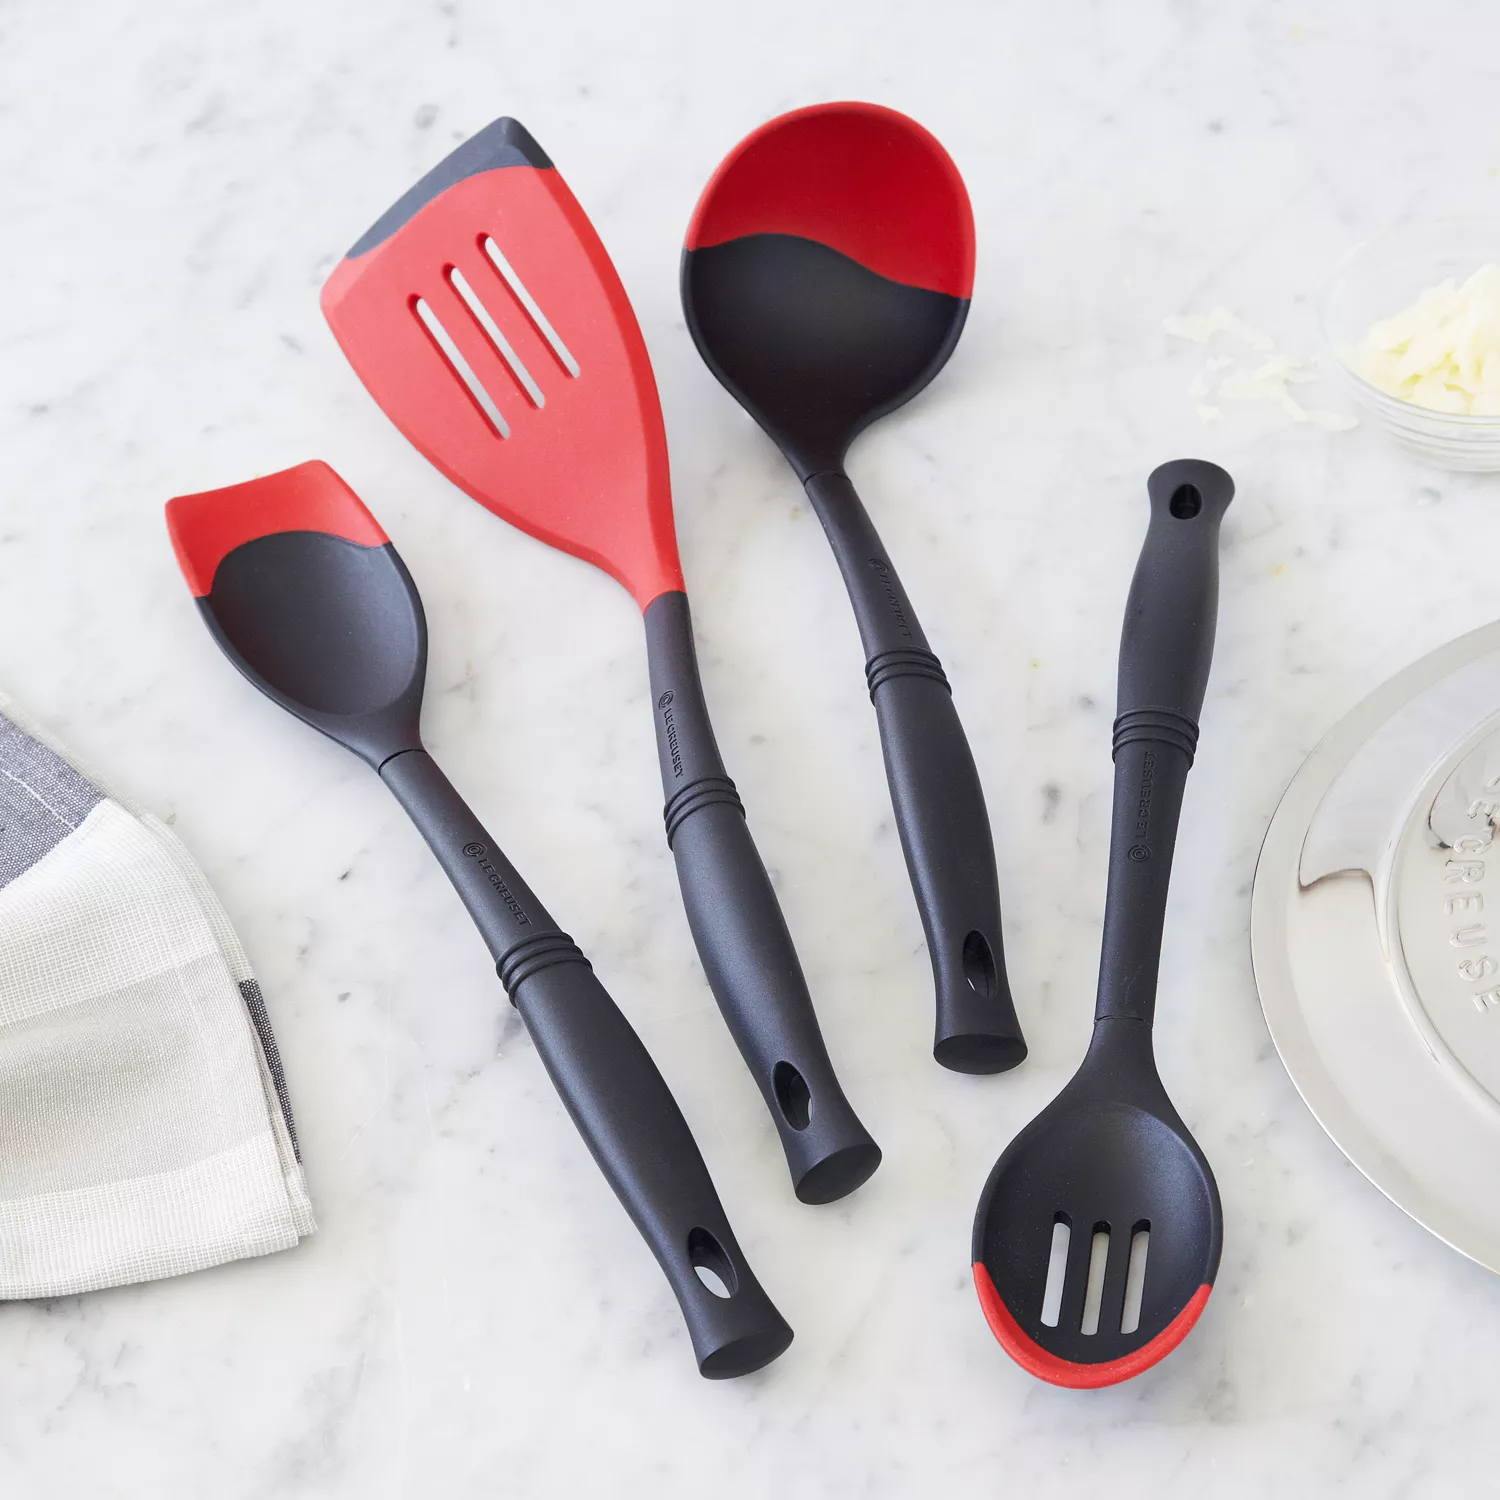 Le Creuset Bi-Material Silicone Utensil Set - 4 Piece – Cutlery and More